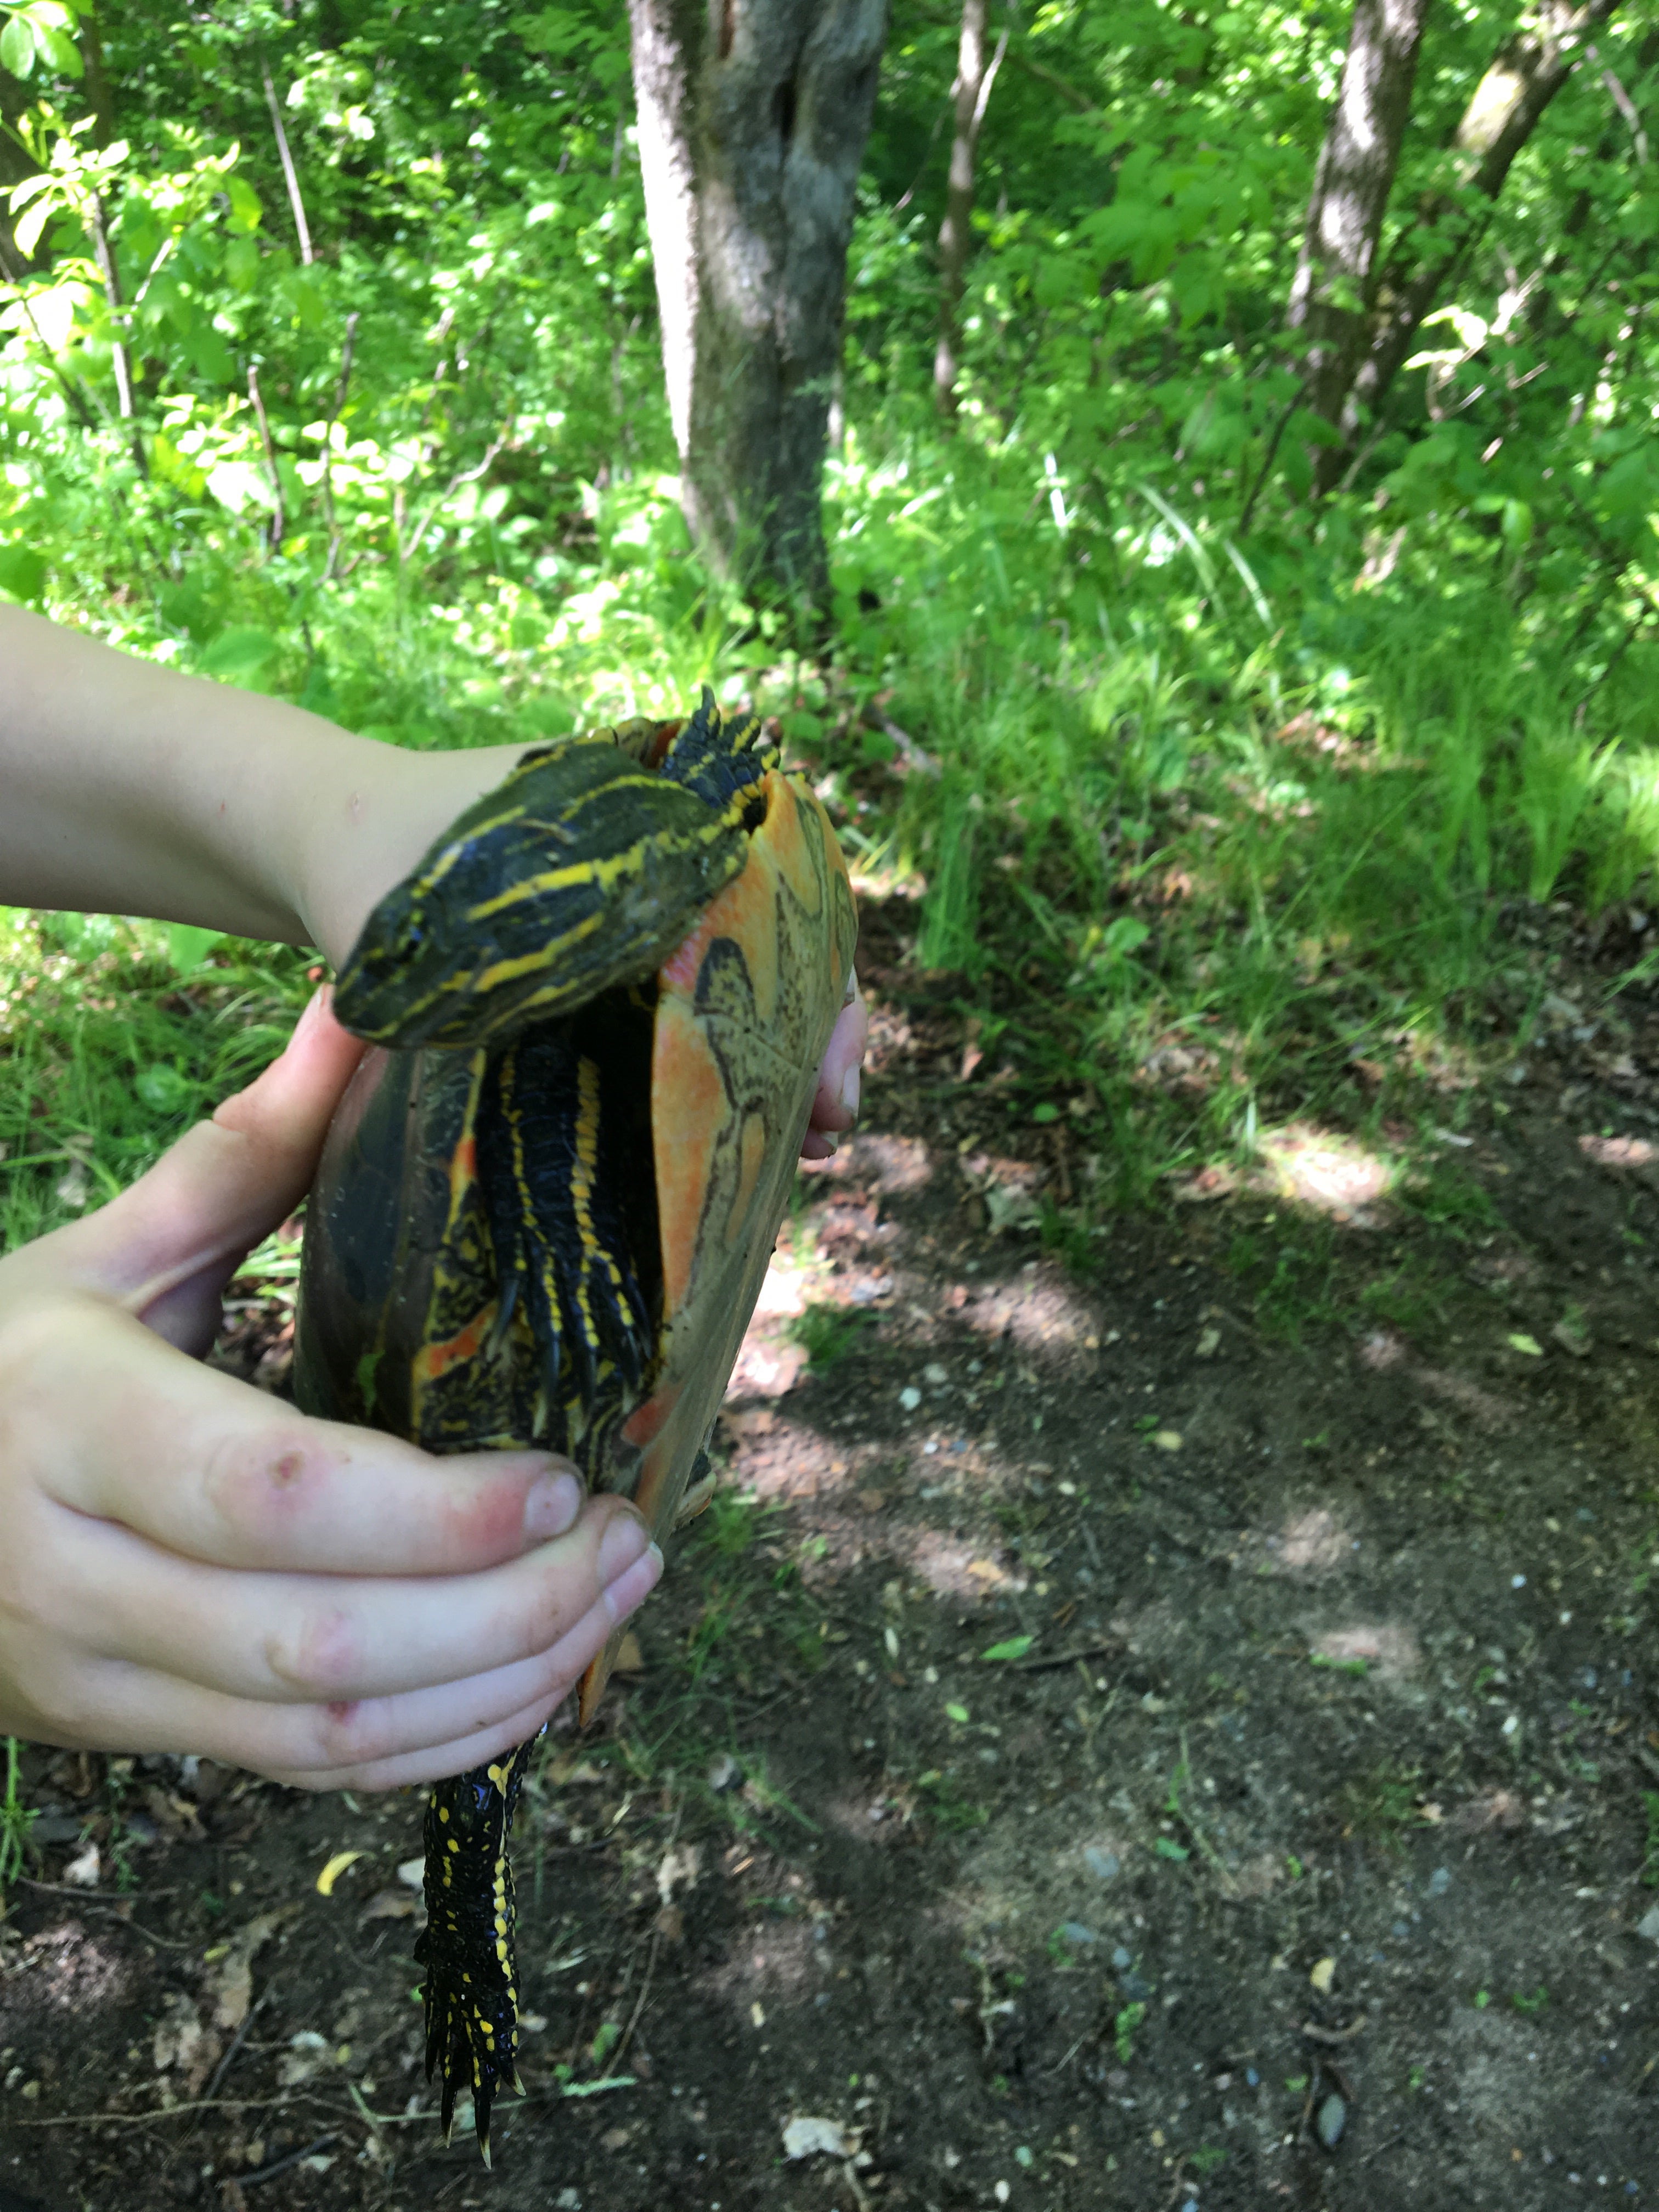 Found a painted turtle by our campsite!